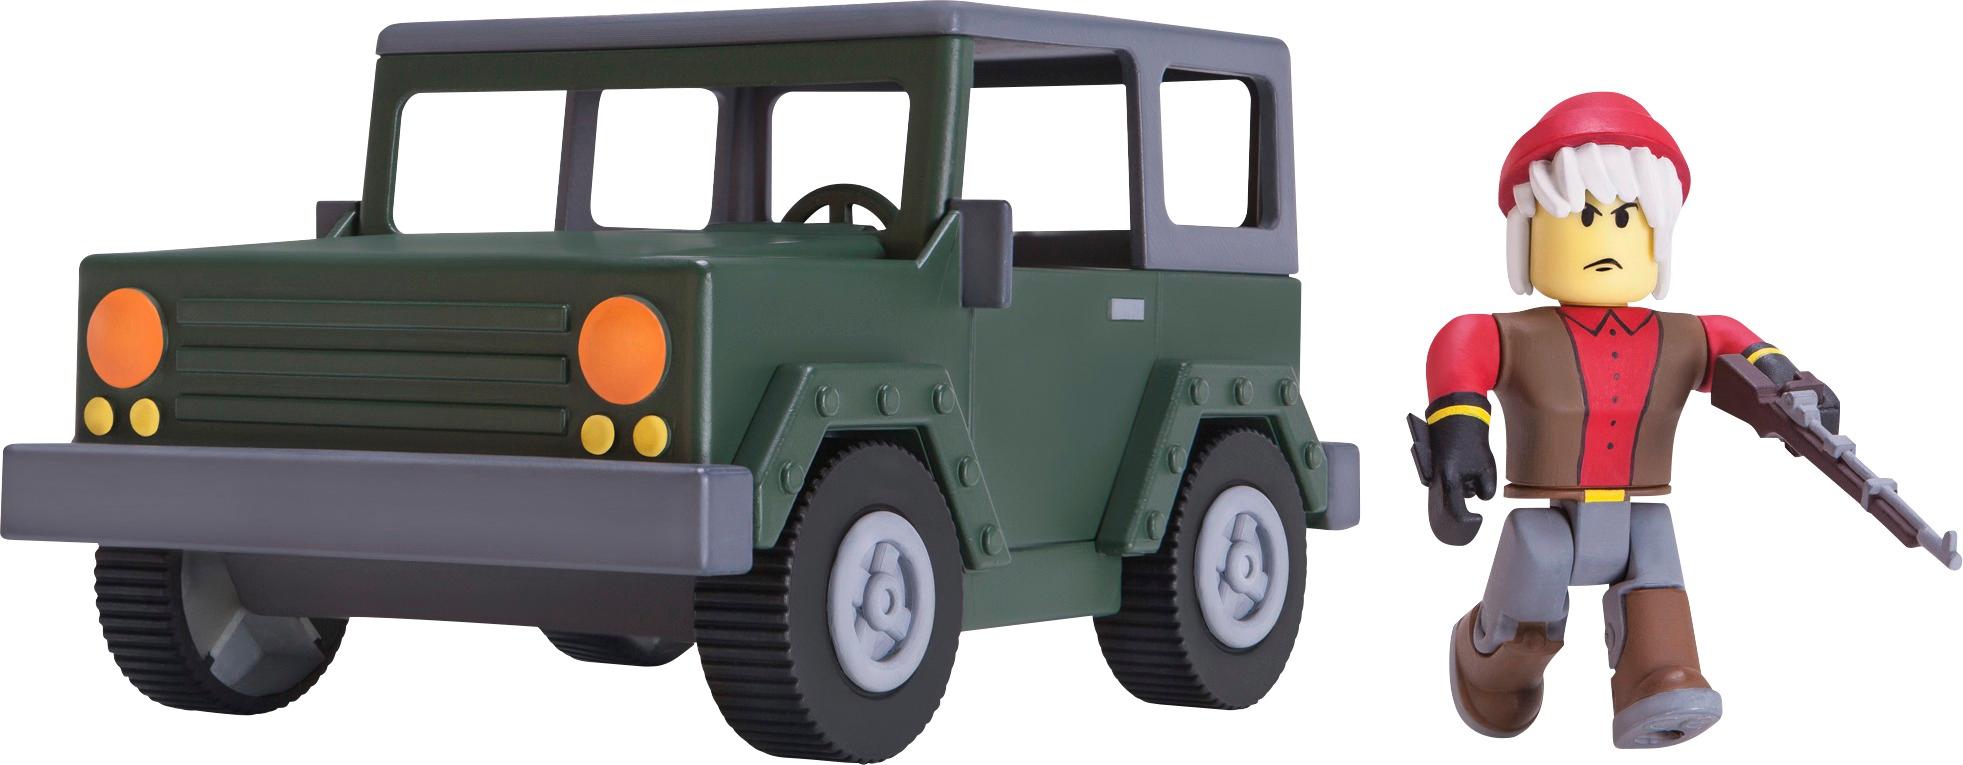 Roblox Large Vehicle Styles May Vary 10770 Best Buy - 